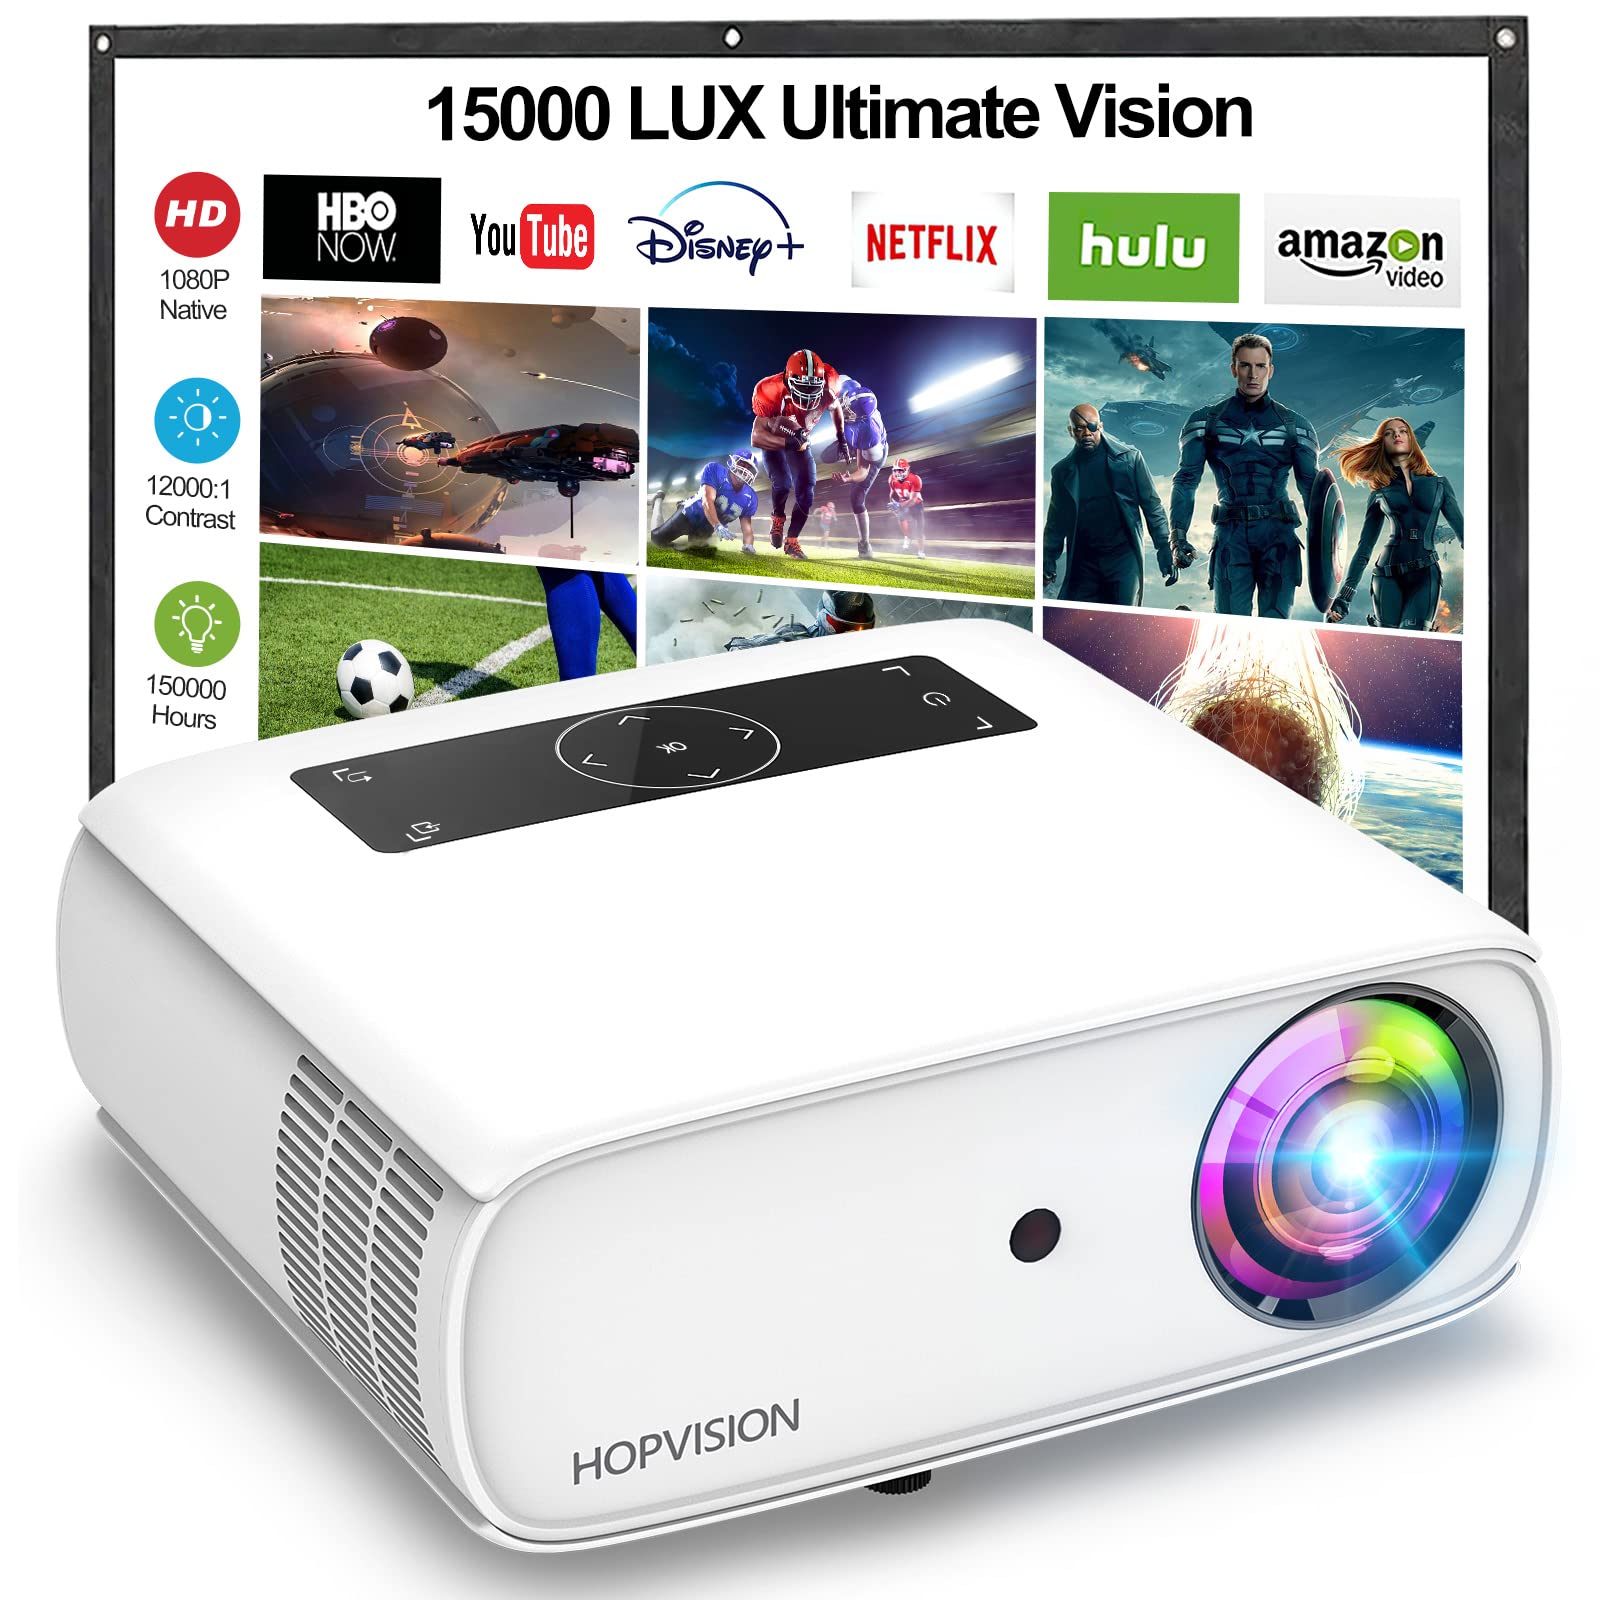 HOPVISION Native 1080P Projector Full HD, 15000Lux Movie Projector with 150000 Hours LED Lamp Life, Support 4K 350